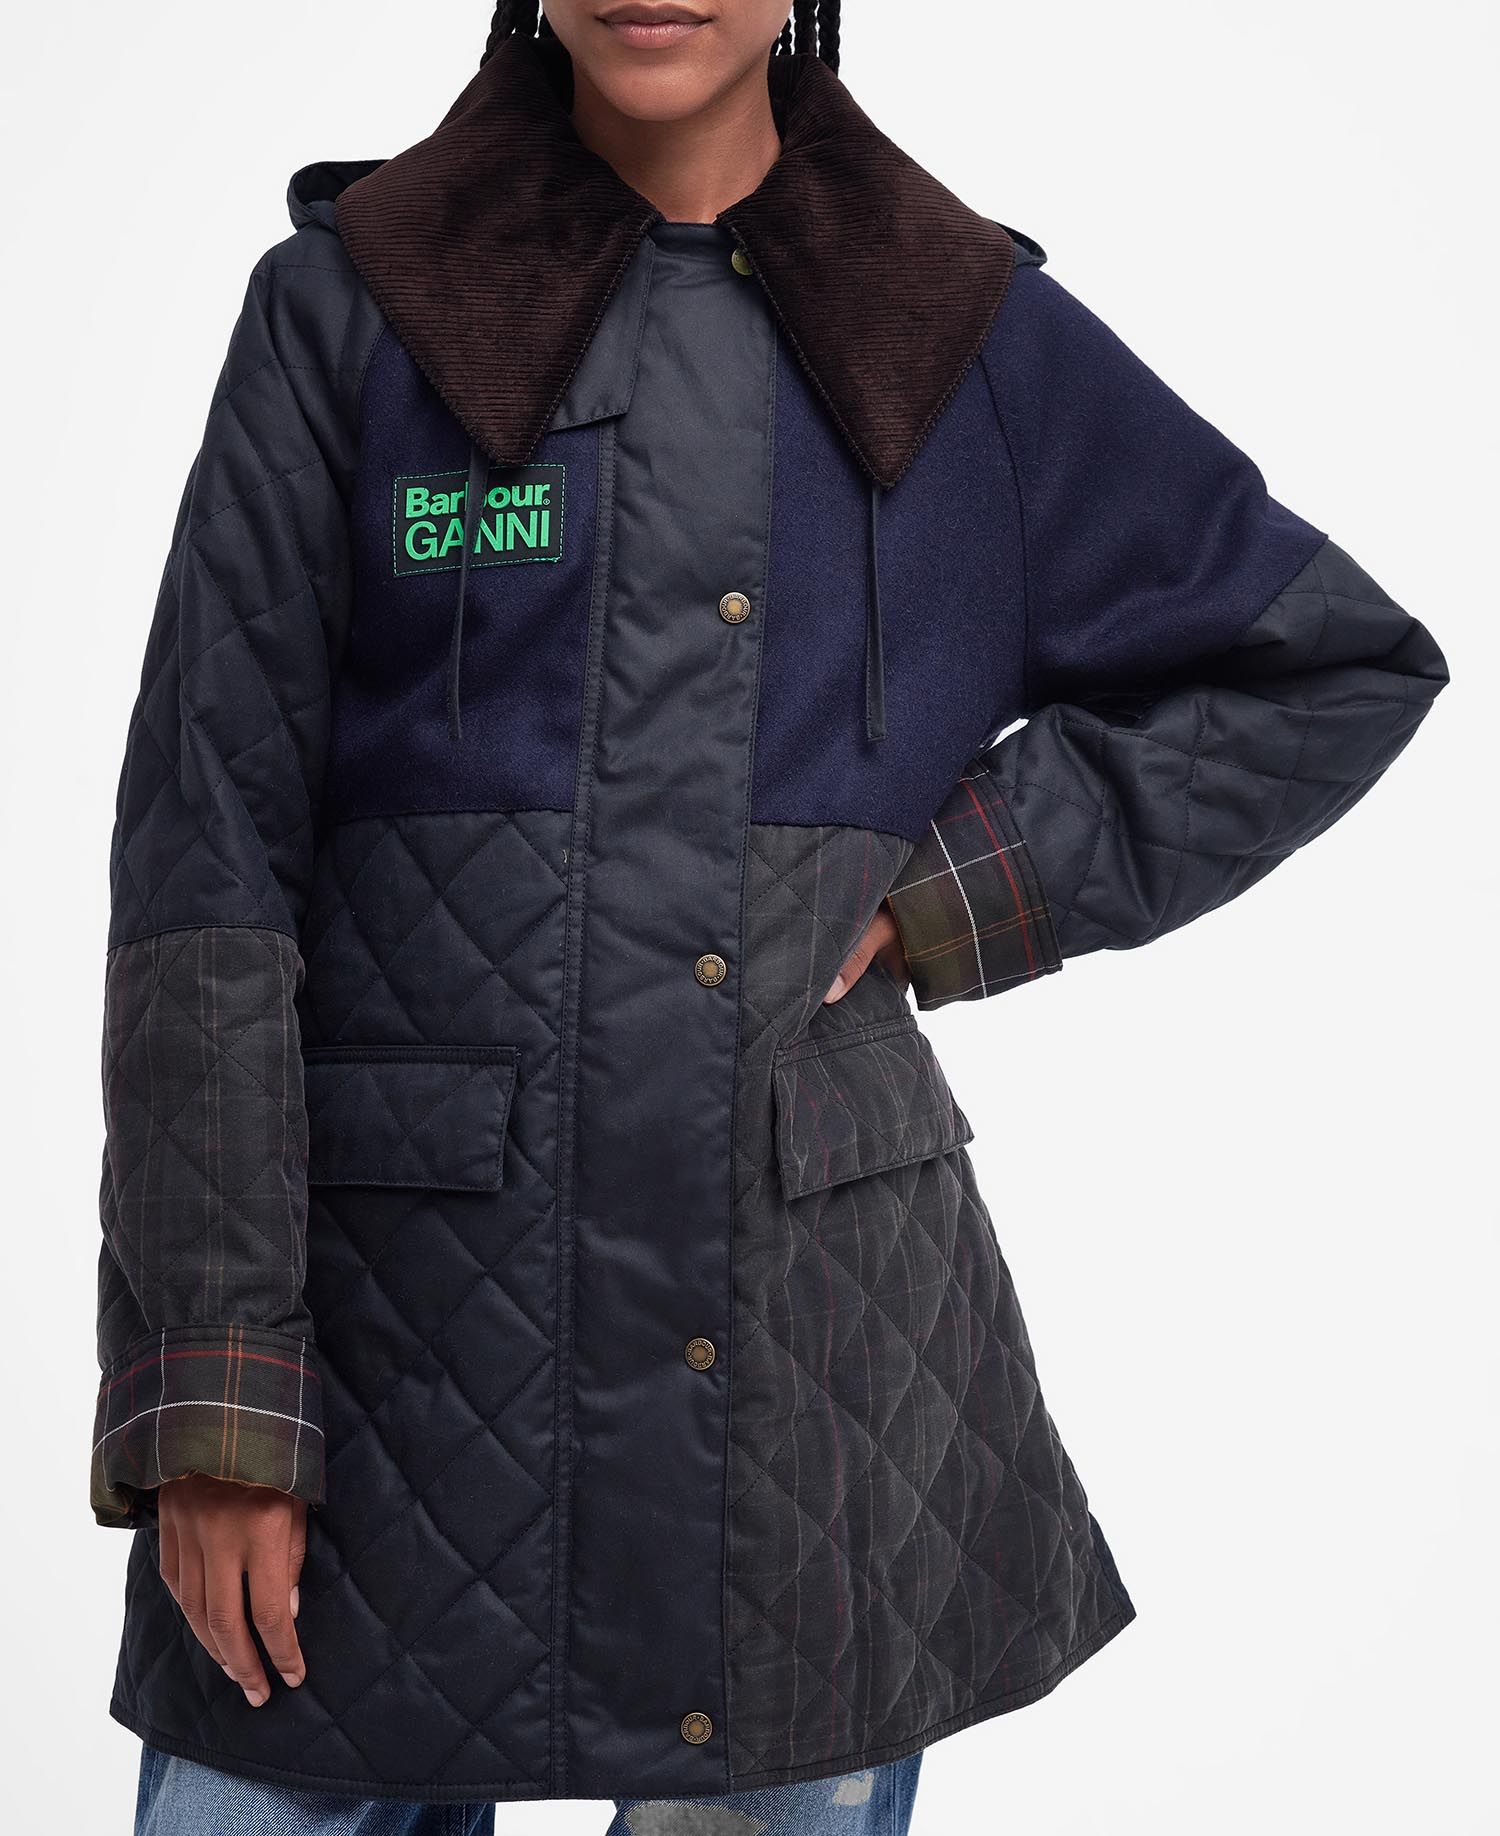 Shop the Barbour x Ganni Short Burghley Quilted Wax Jacket in Navy today.